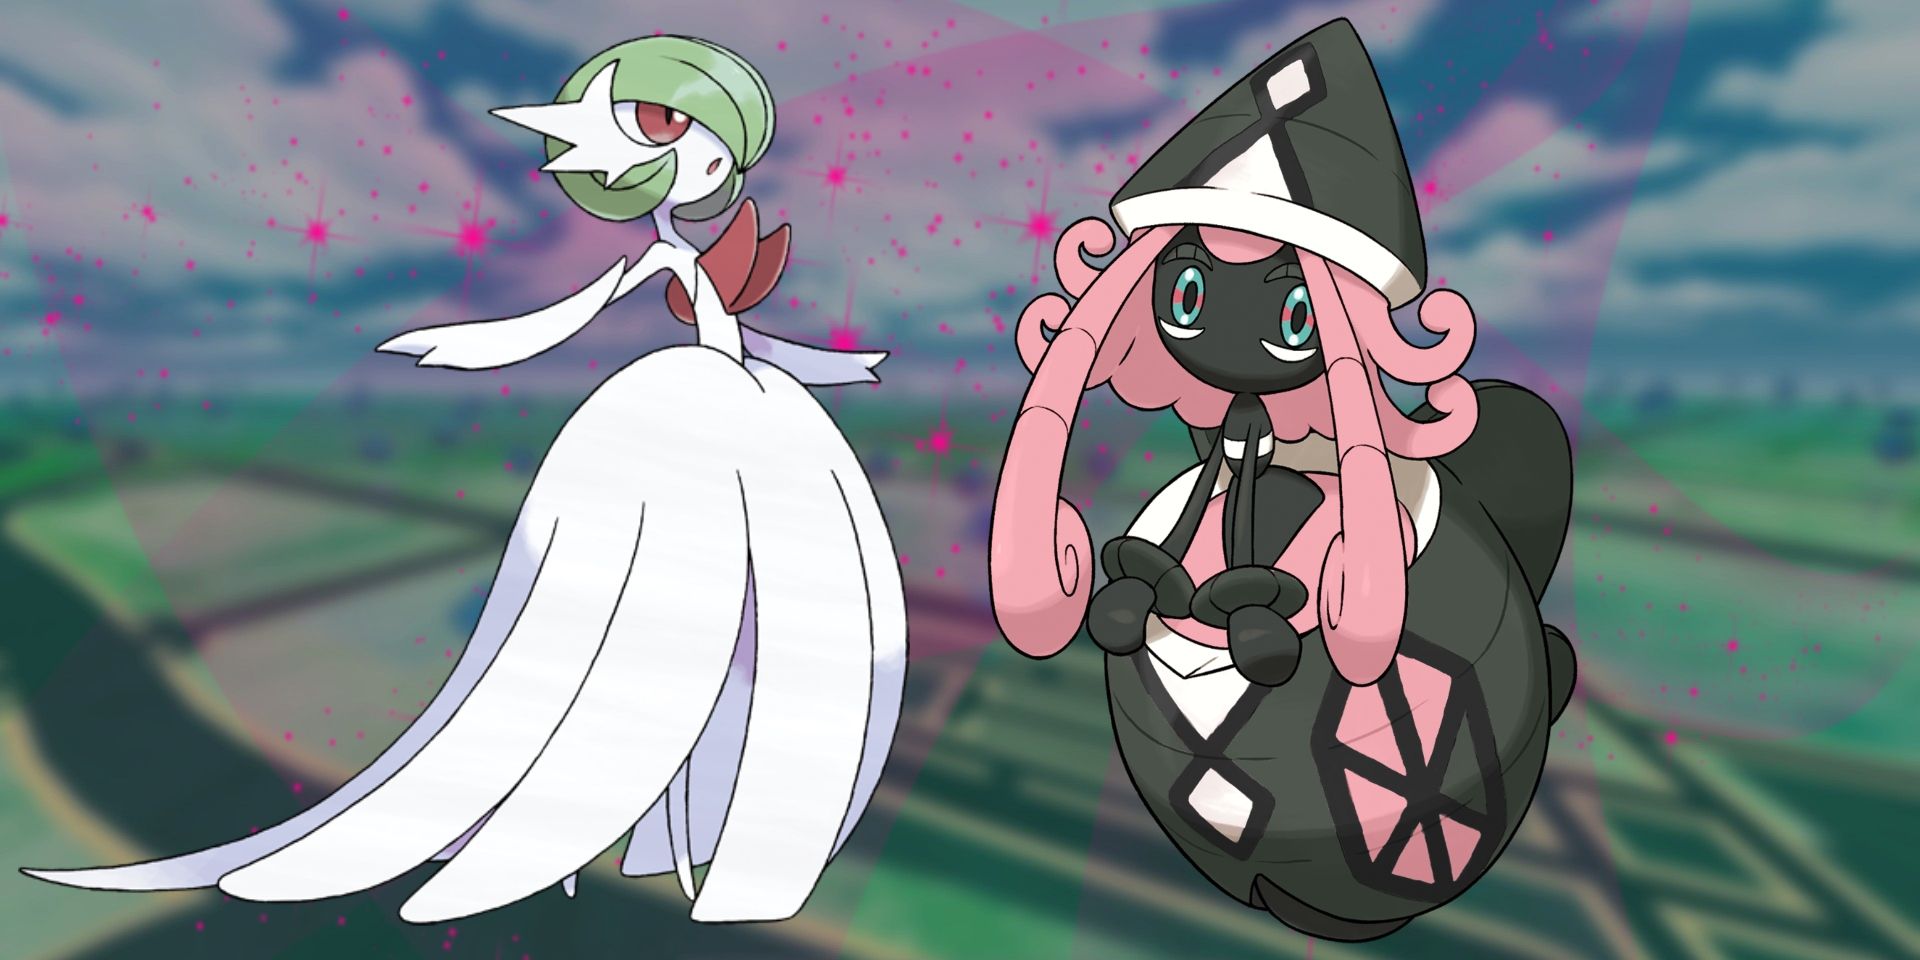 Tapu Lele and Mega Gardevoir with Pokemon GO's map blurred-out in the background.